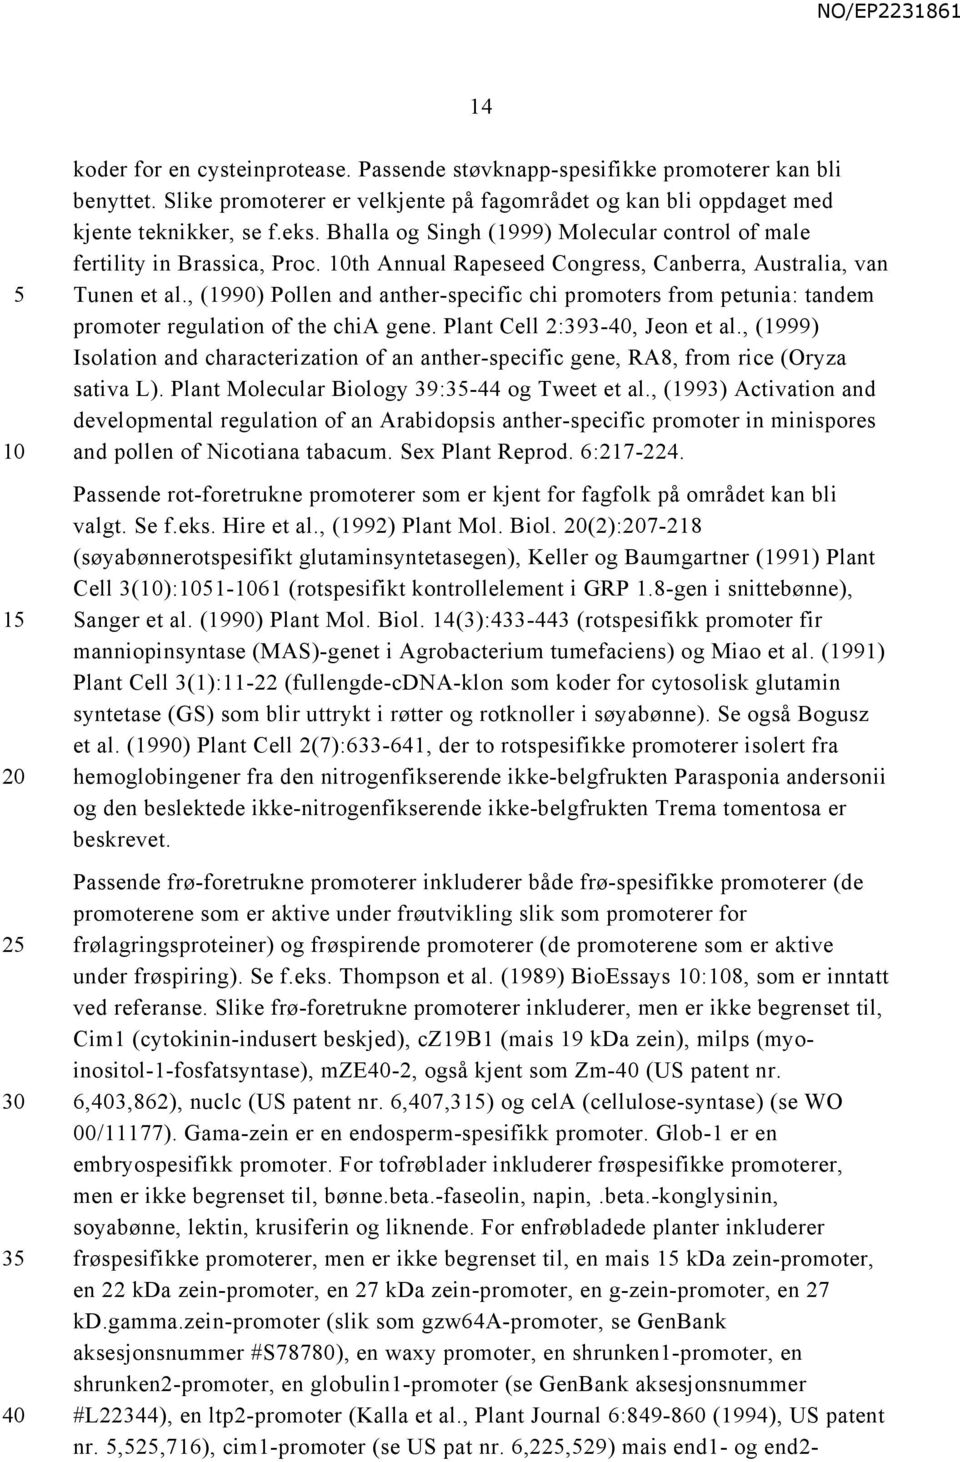 10th Annual Rapeseed Congress, Canberra, Australia, van Tunen et al., (1990) Pollen and anther-specific chi promoters from petunia: tandem promoter regulation of the chia gene.